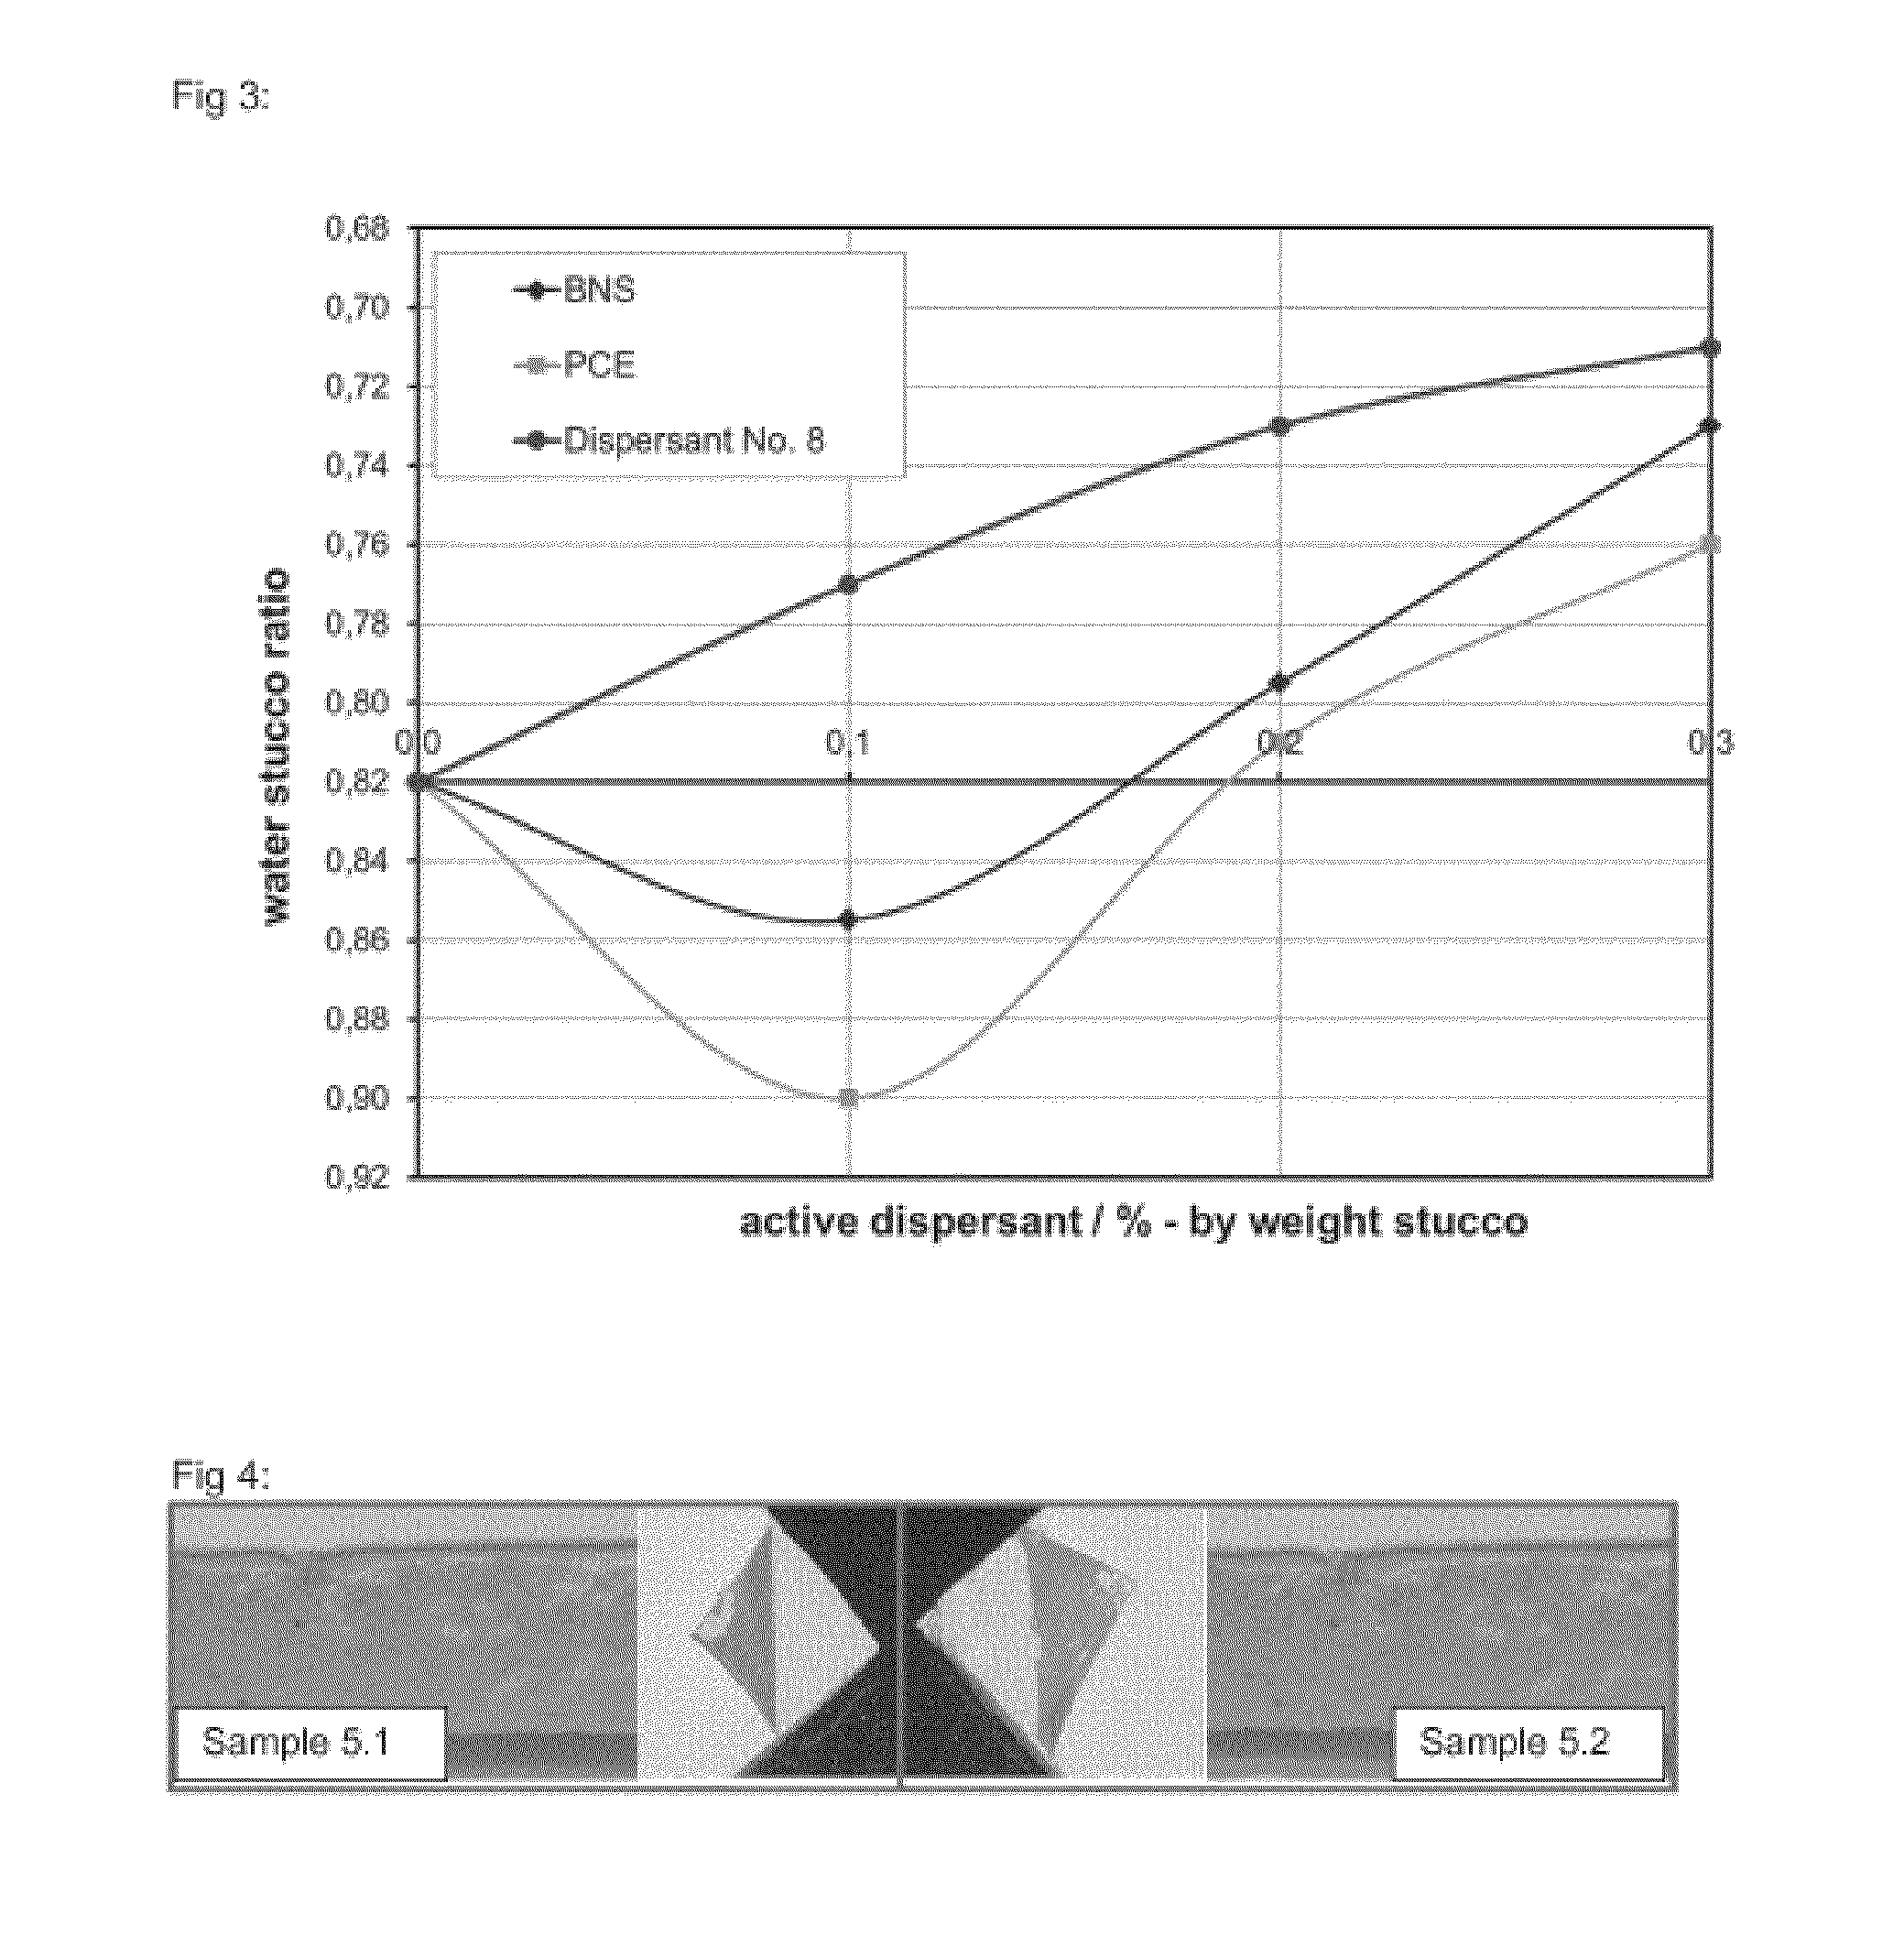 Light-weight gypsum board with improved strength and method for making same